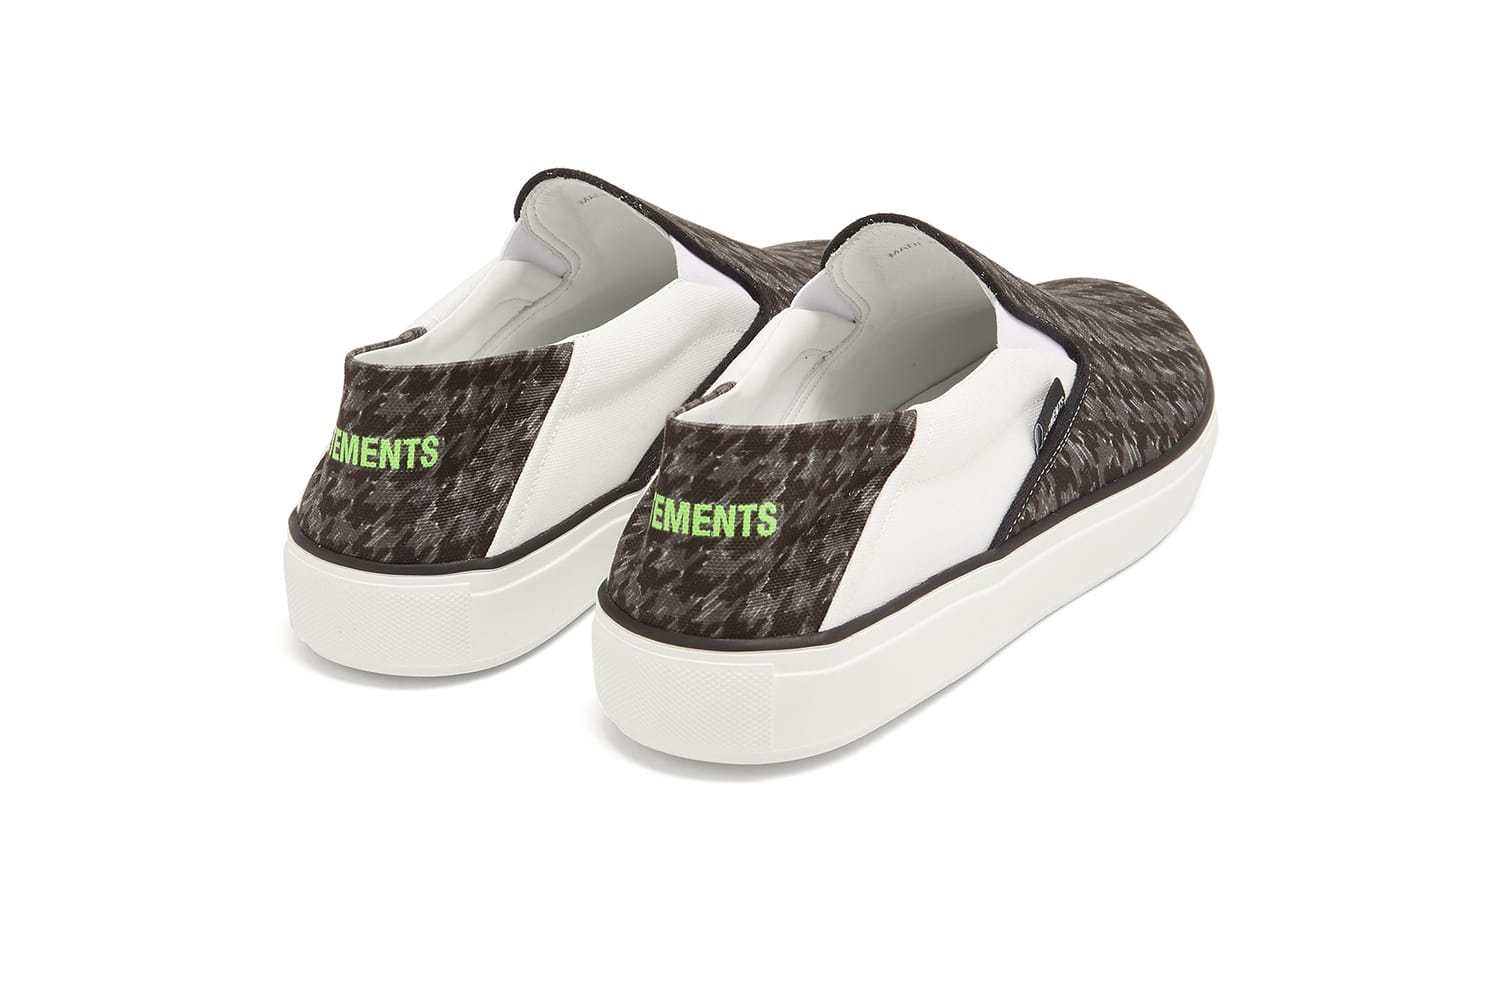 Vetements Houndstooth Slip-On Now up 